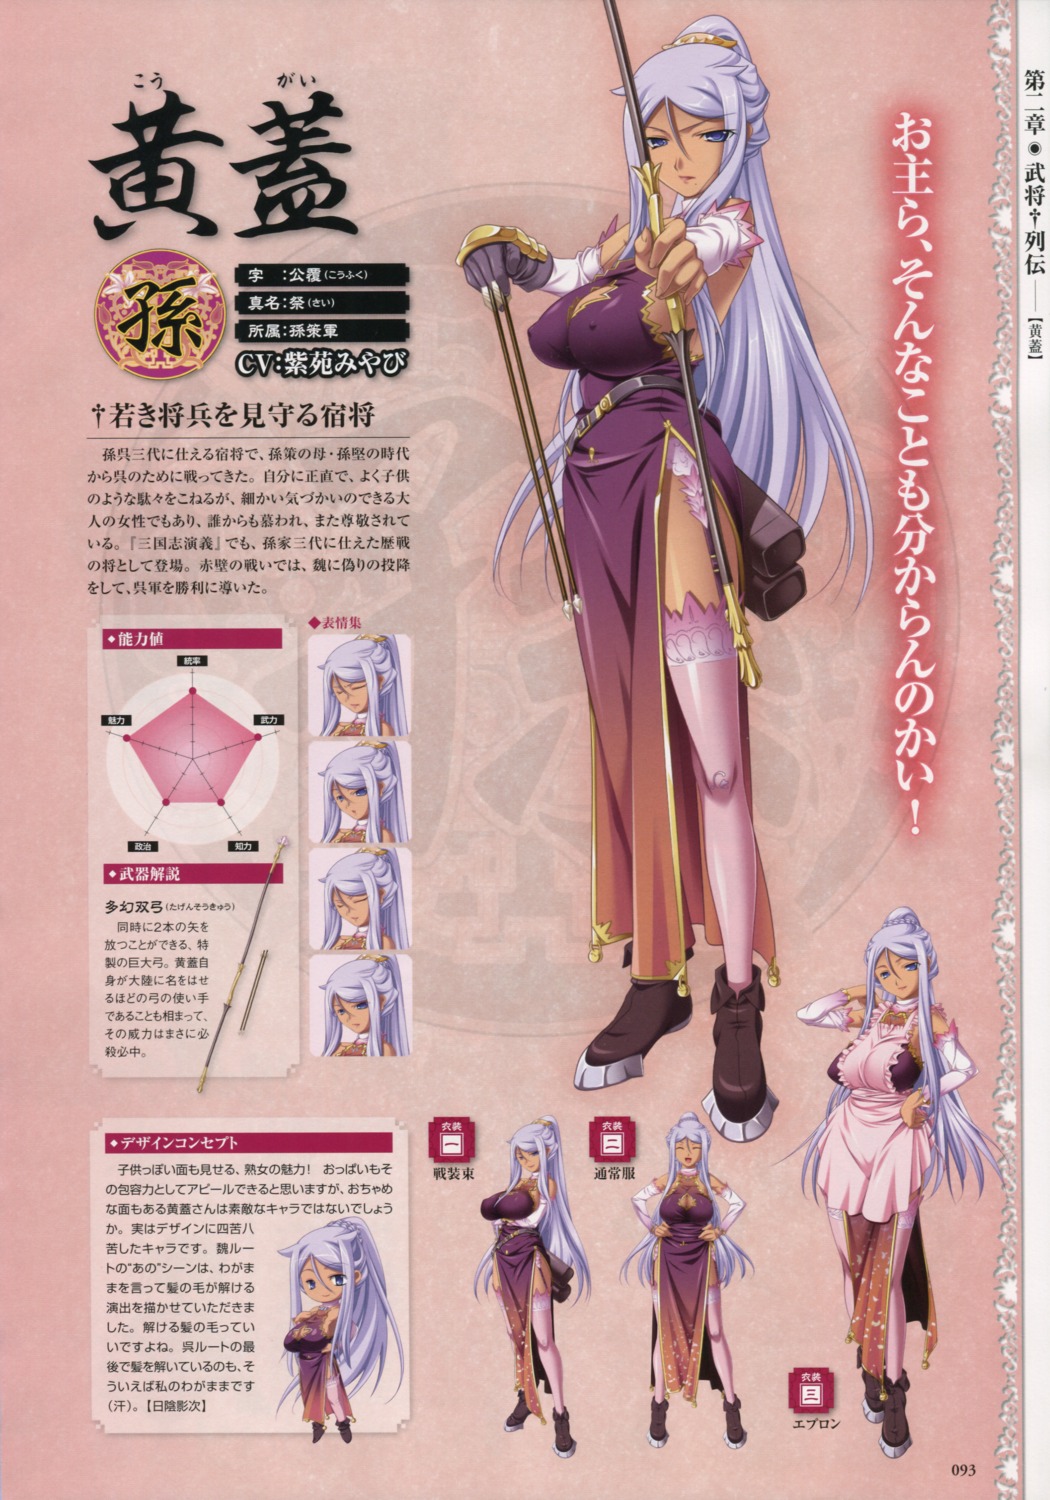 asian_clothes baseson character_design chibi erect_nipples expression koihime_musou kougai profile_page thighhighs weapon